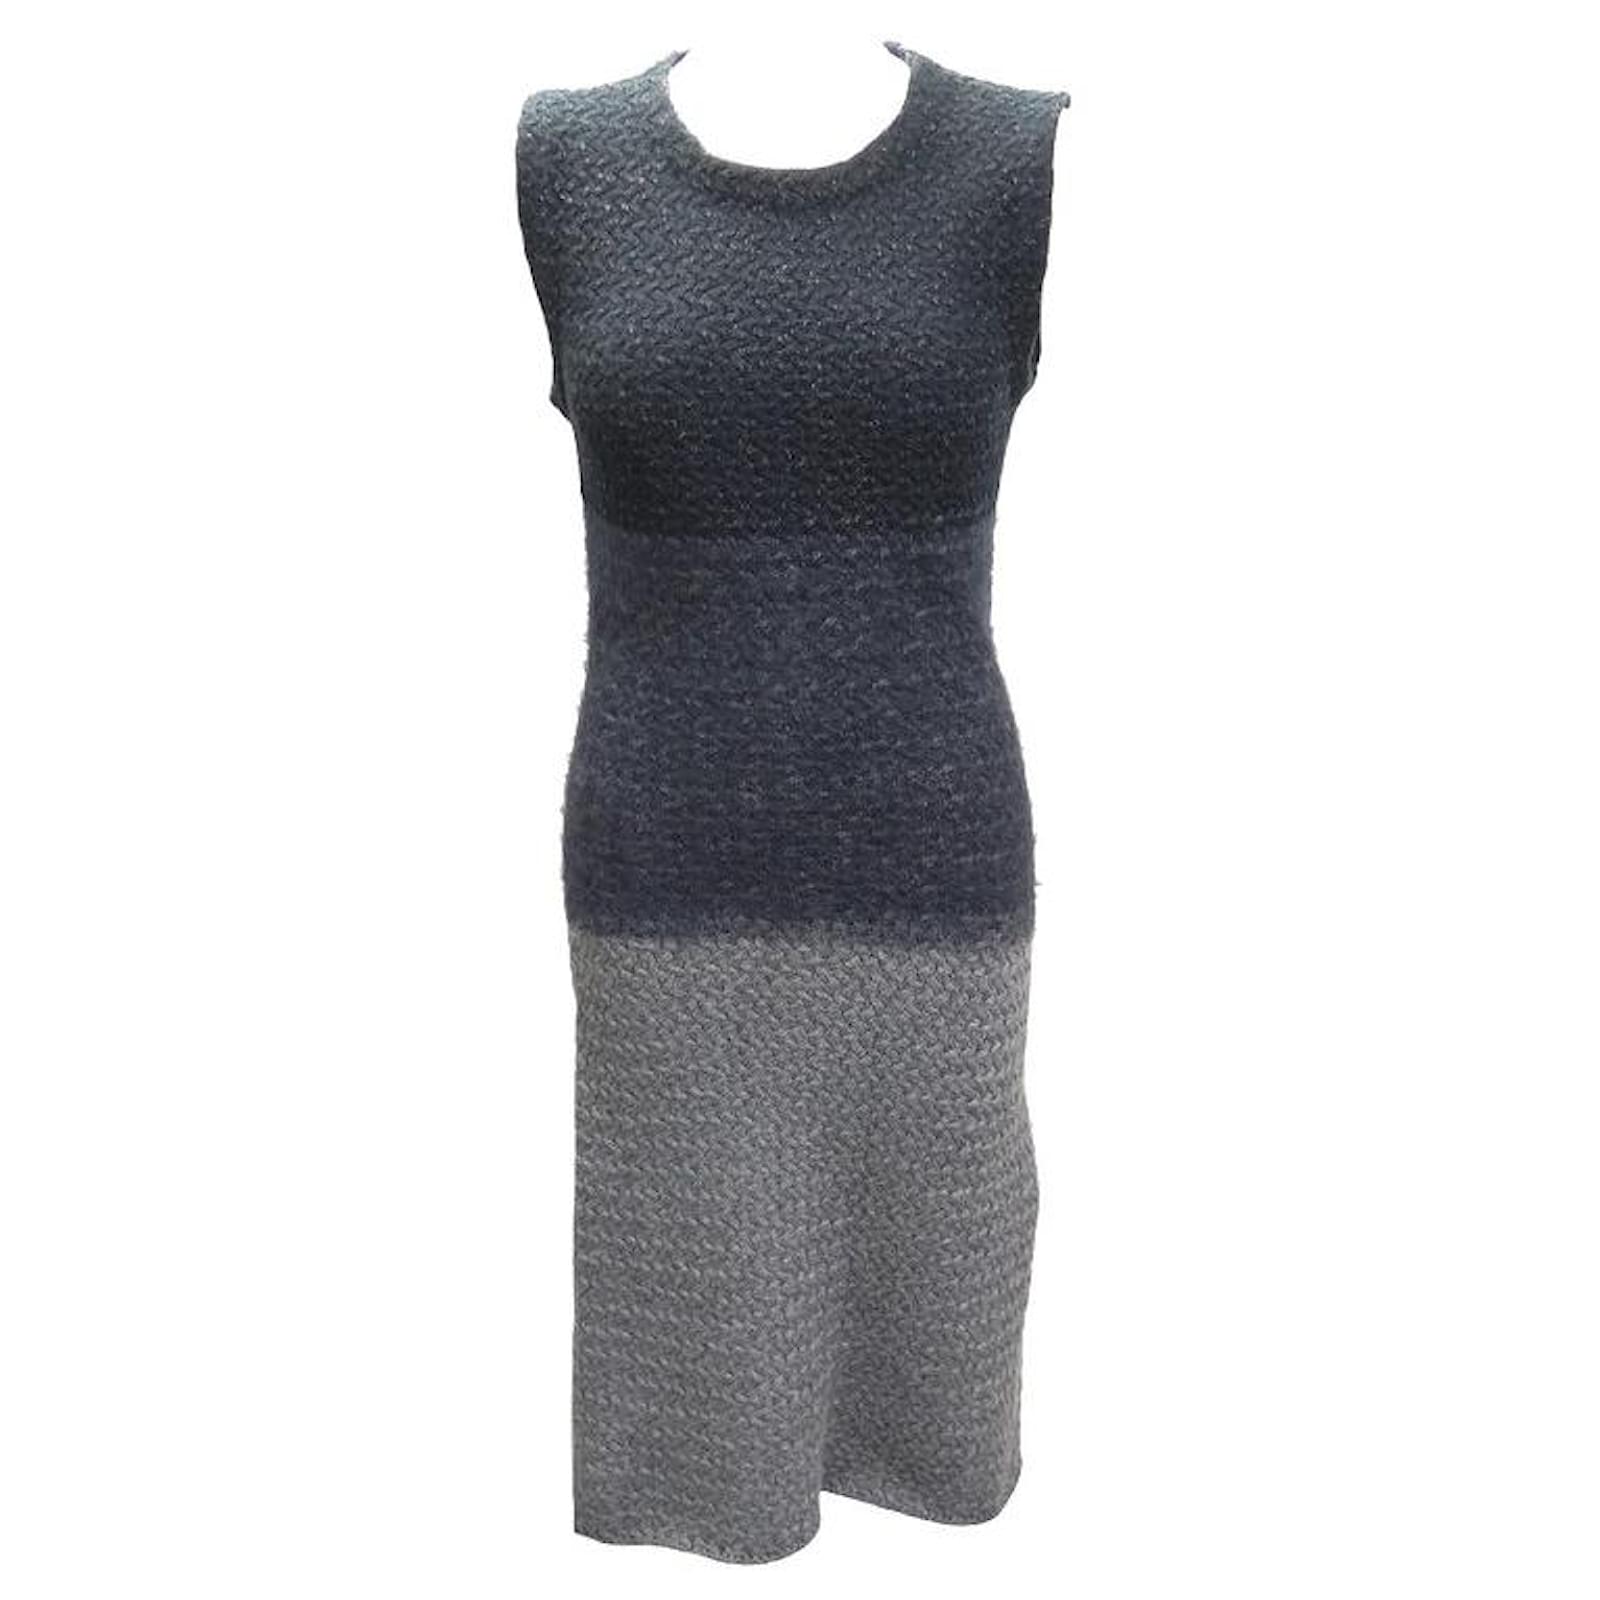 NEW CHRISTIAN DIOR DRESS 2H24615I HAVE563 36 S IN GRAY TRICOLOR